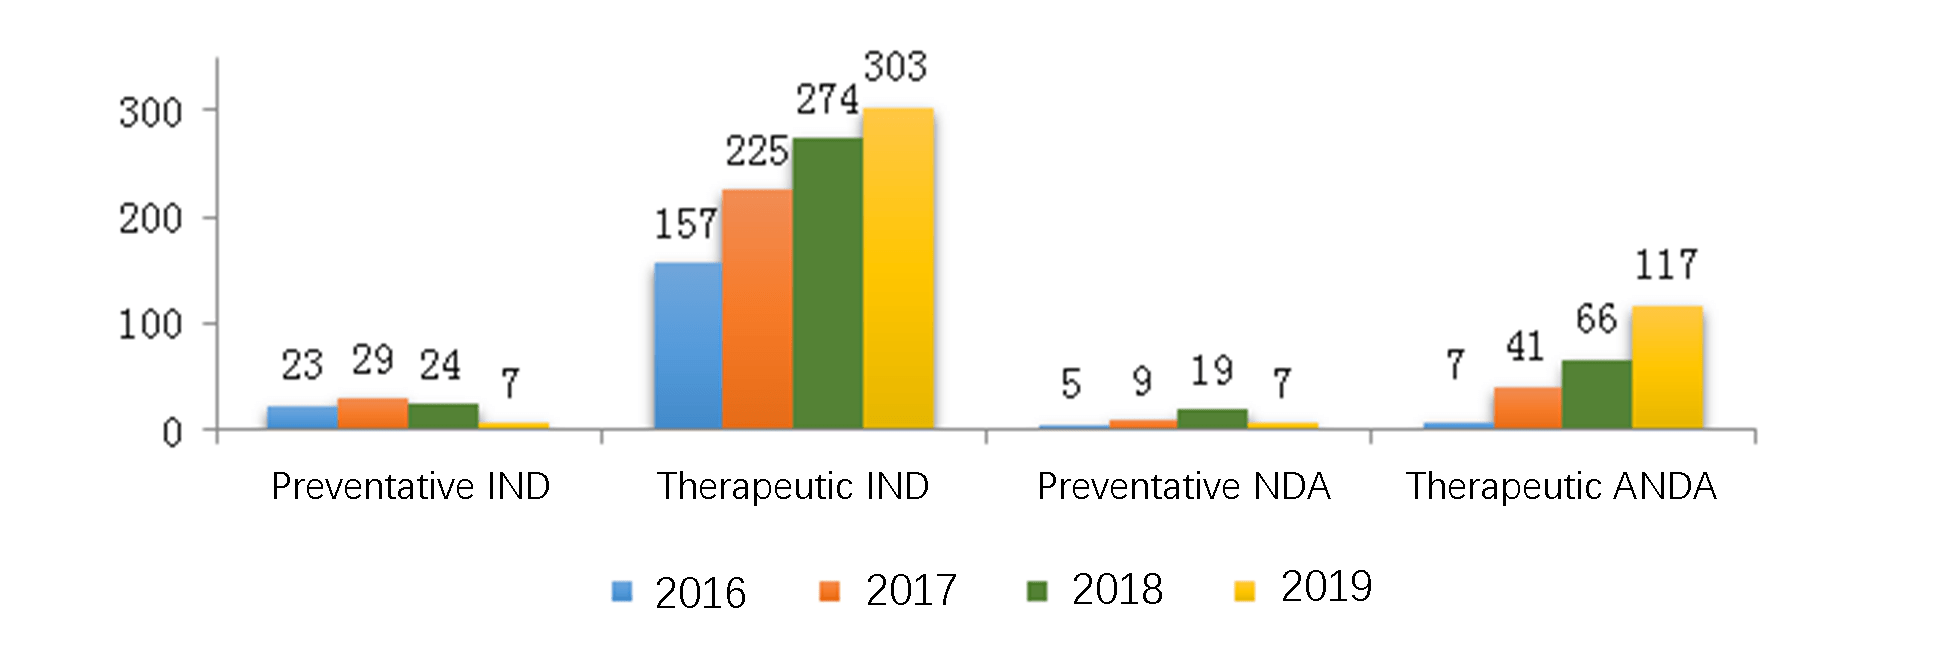 Fig. 11 Number of Biological Product Registrations Approved from 2016 to 2019 for Preventative or Therapeutic INDs and NDAs